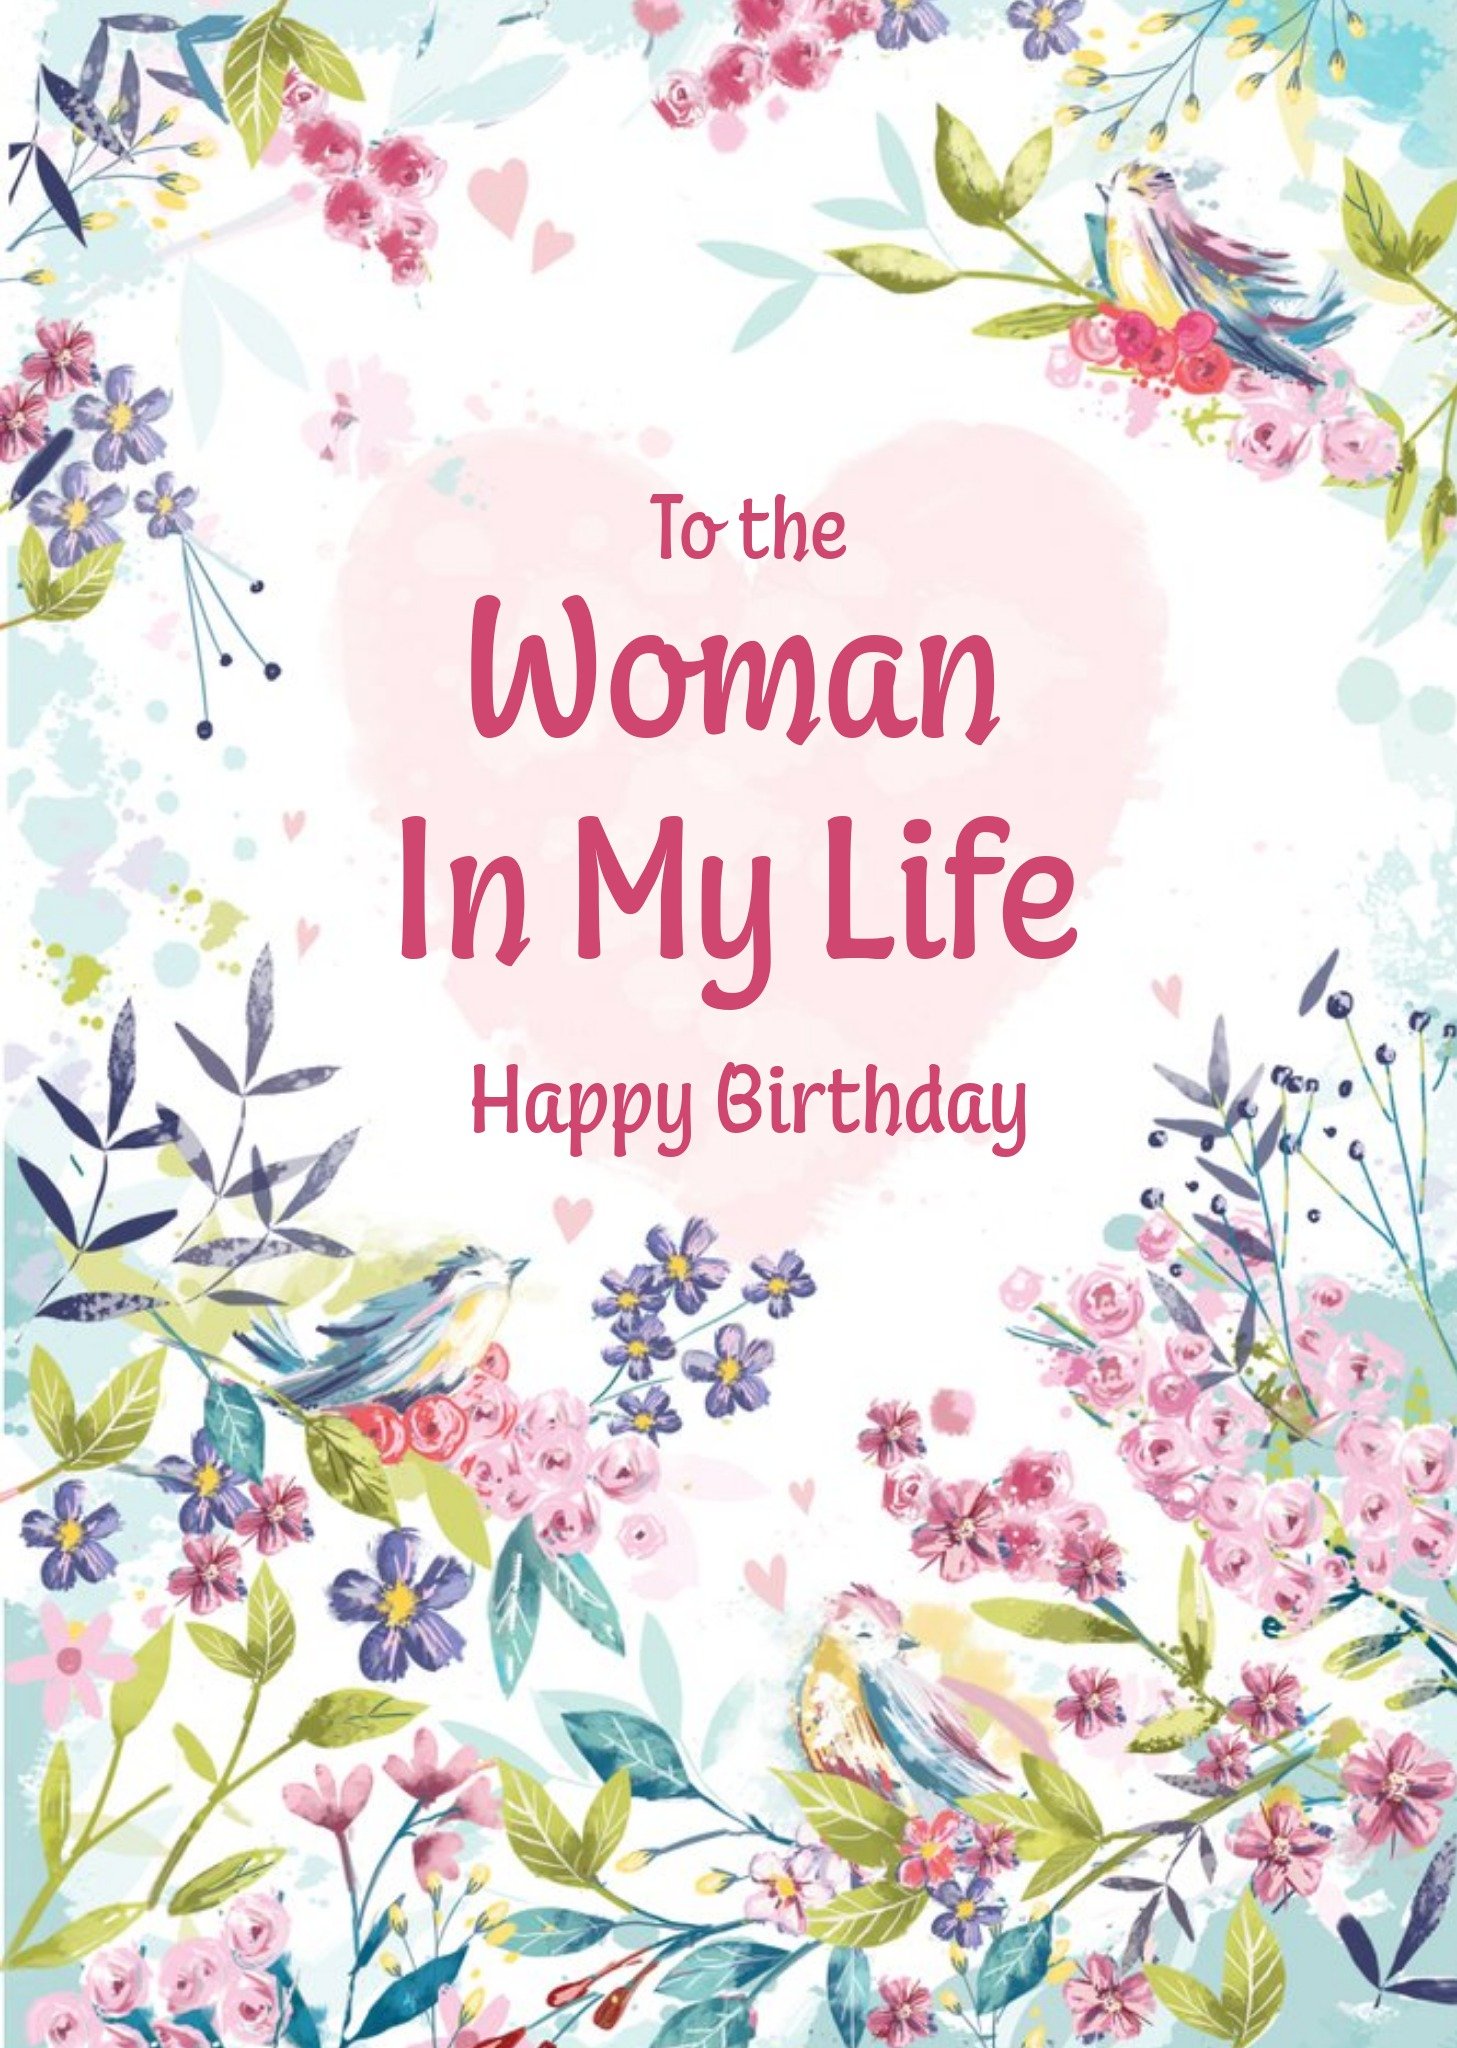 Ling Design Pastel Garden To The Woman In My Life Birthday Card Ecard